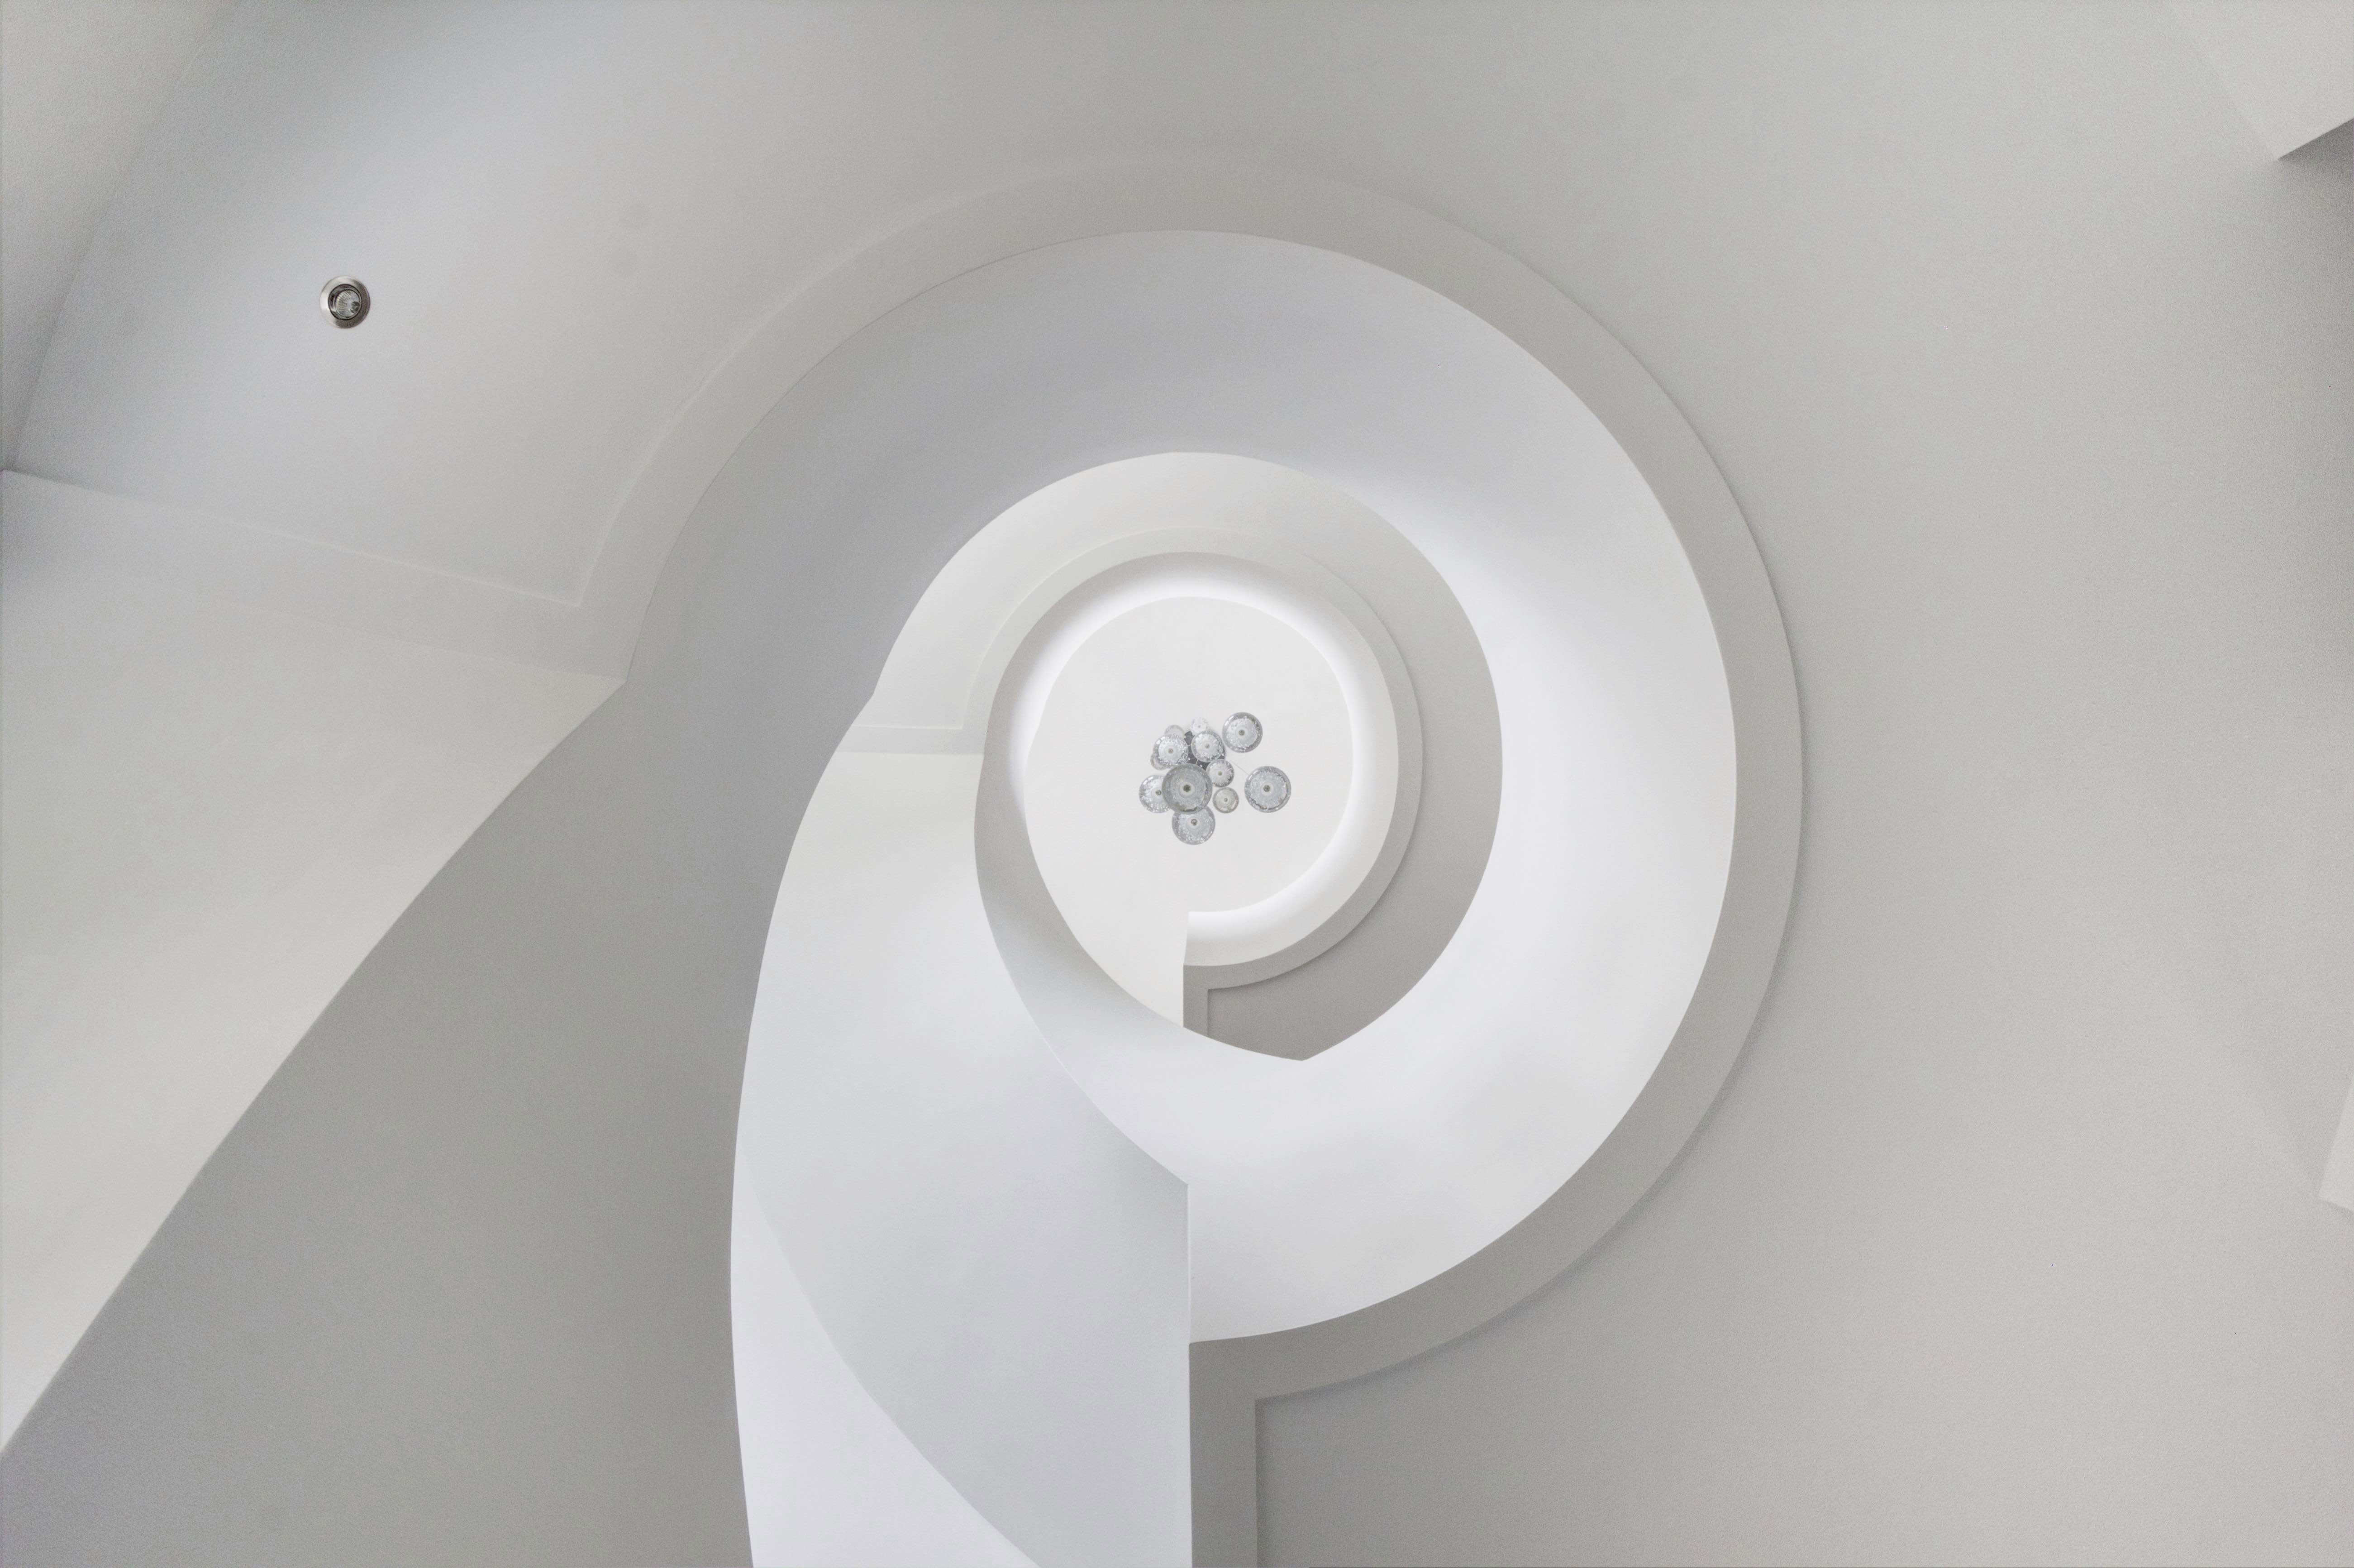 Spiral staircases